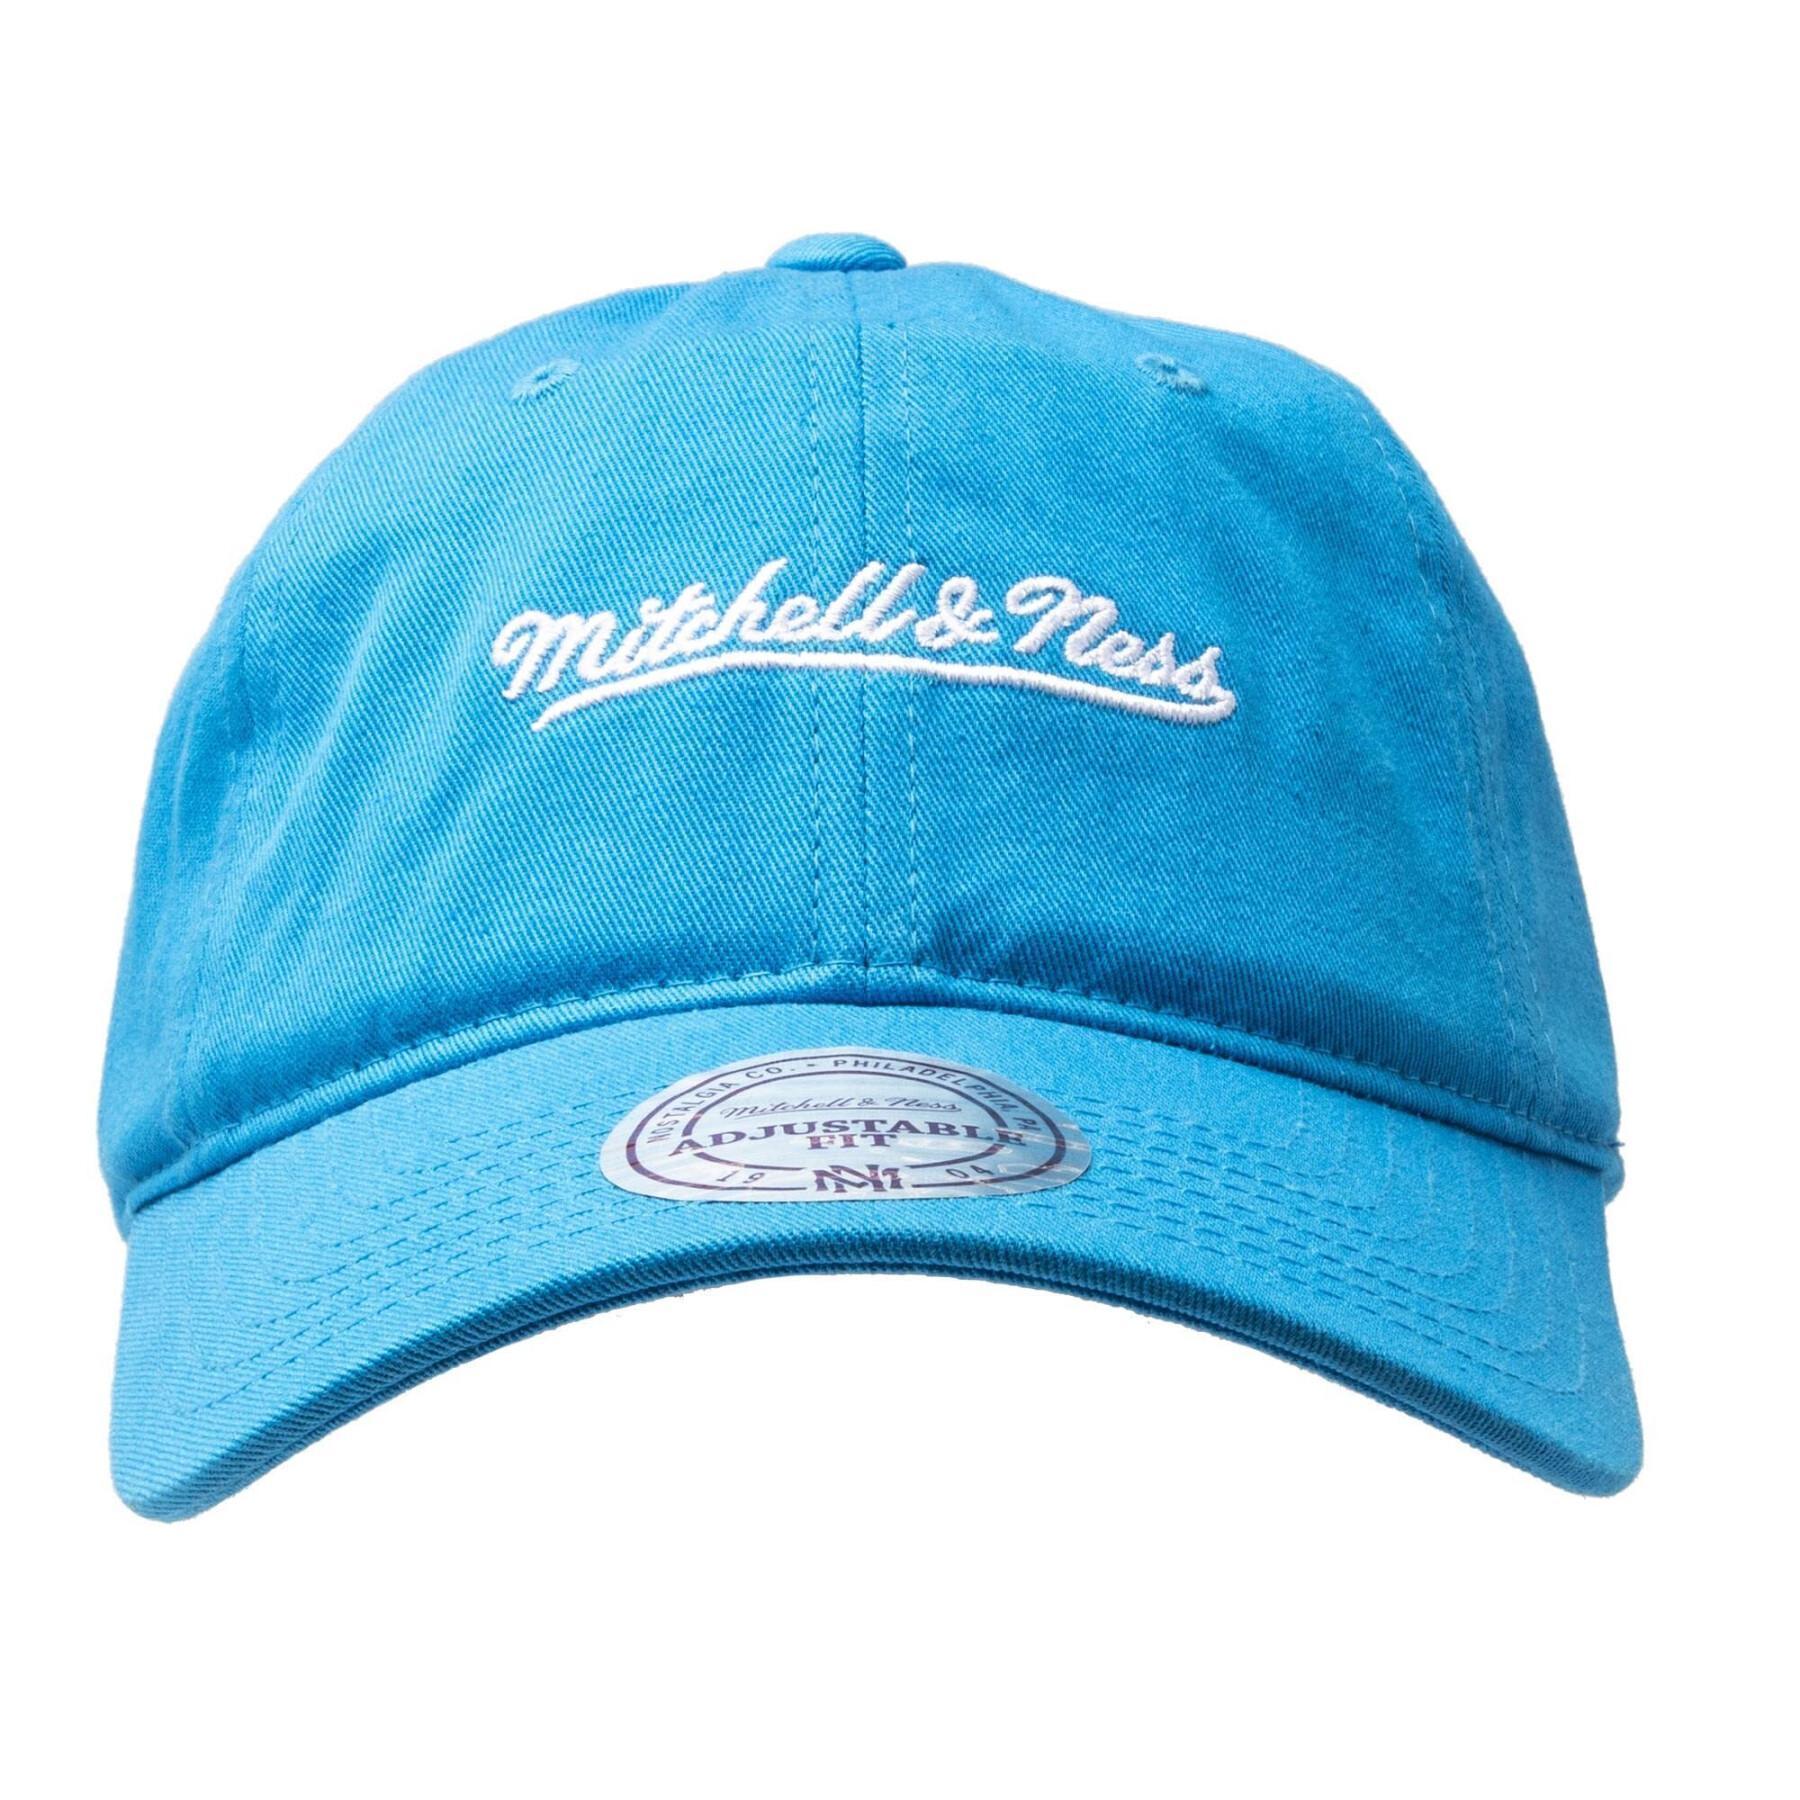 Pet Mitchell & Ness washed cotton dad